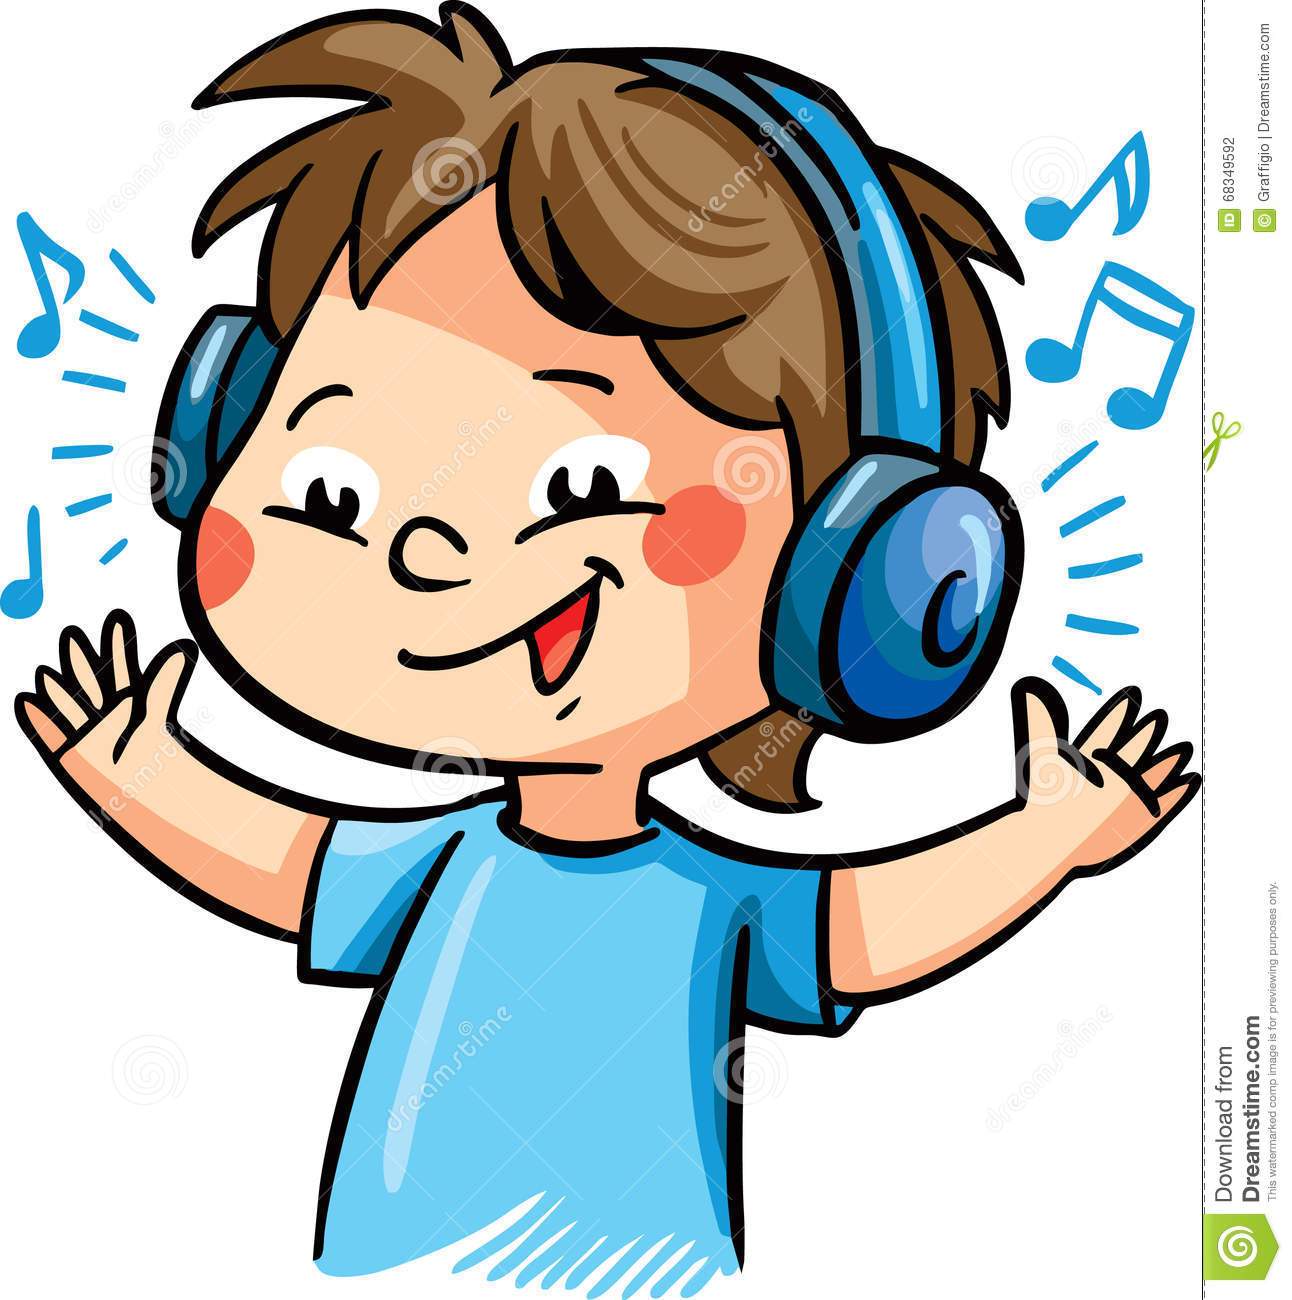 Boy listening to music clipart 3 » Clipart Portal.